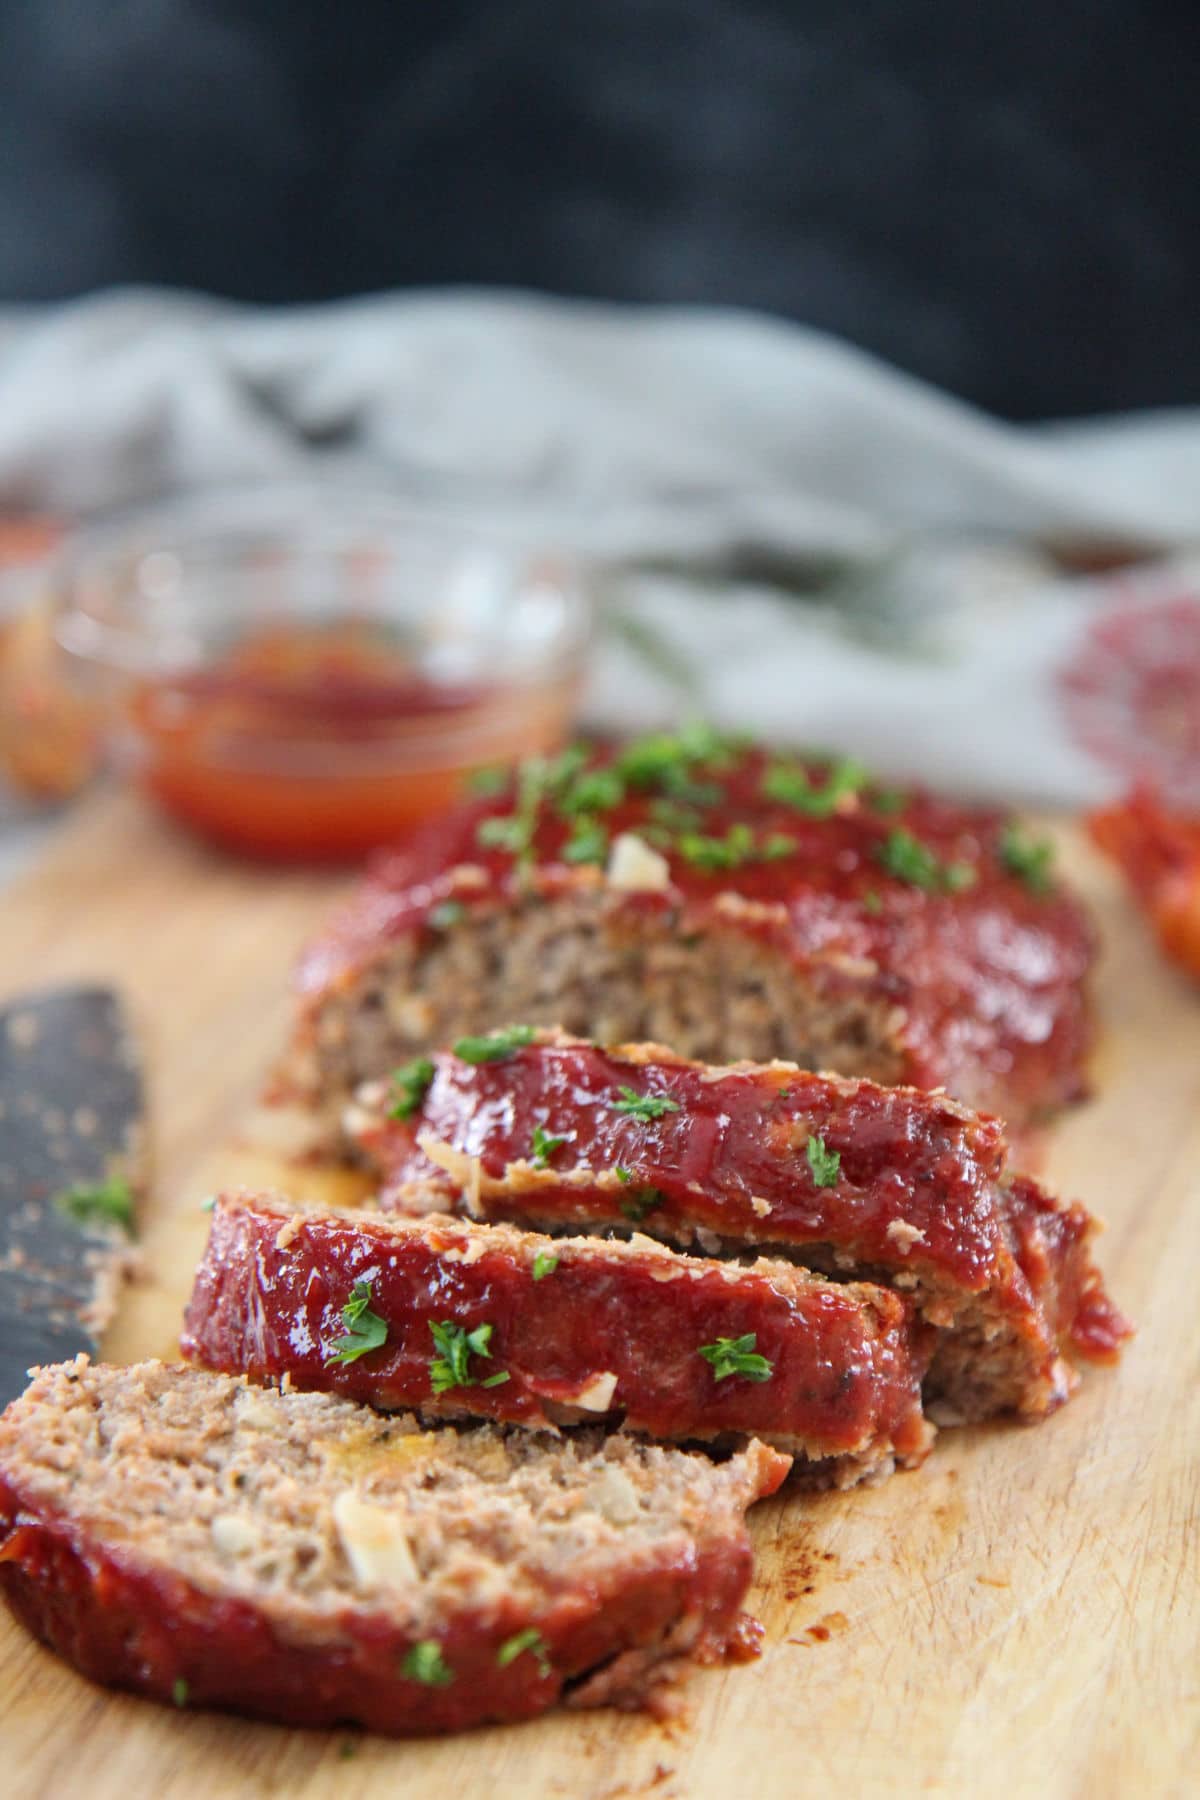 https://www.cookedbyjulie.com/wp-content/uploads/2019/06/classic-turkey-meatloaf-one.jpg